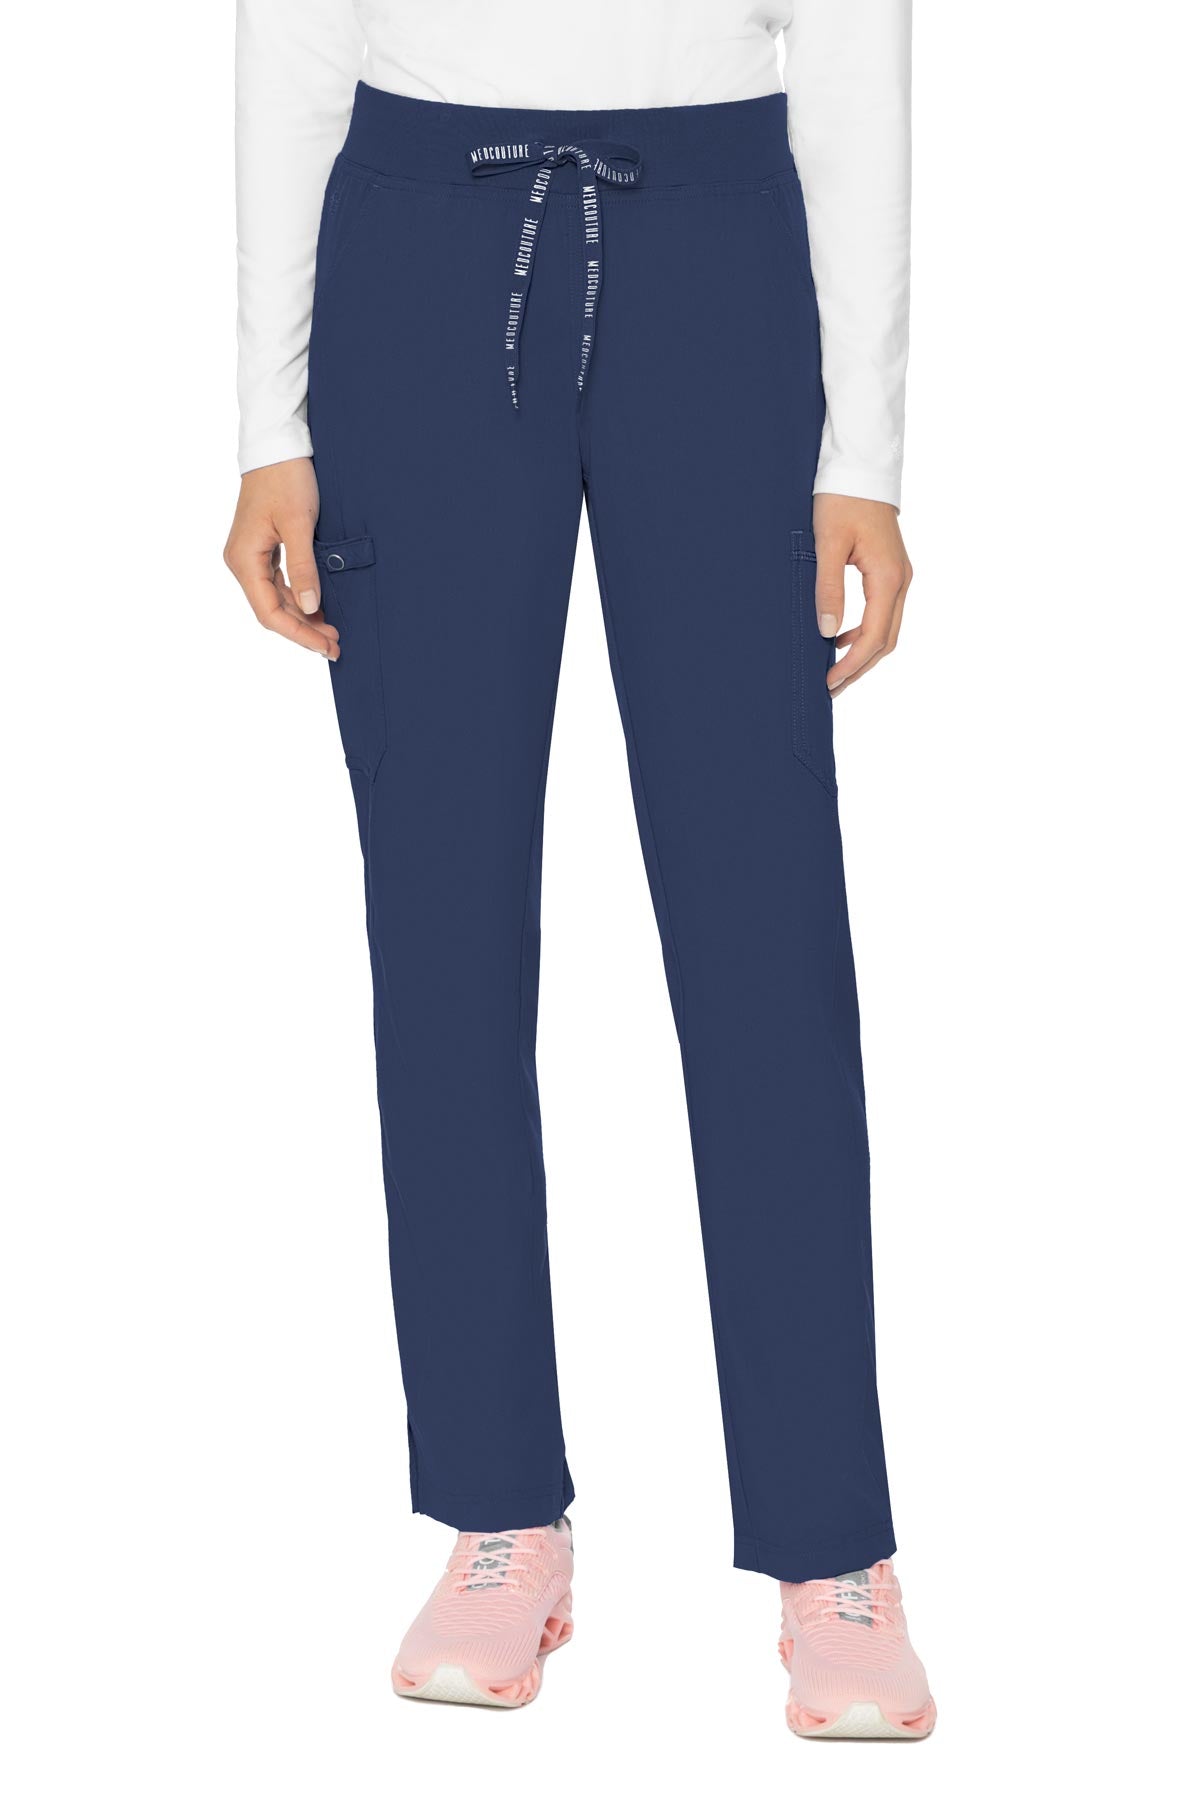 Med Couture Scrub Pants Touch Yoga in Navy at Parker's Clothing and Shoes.